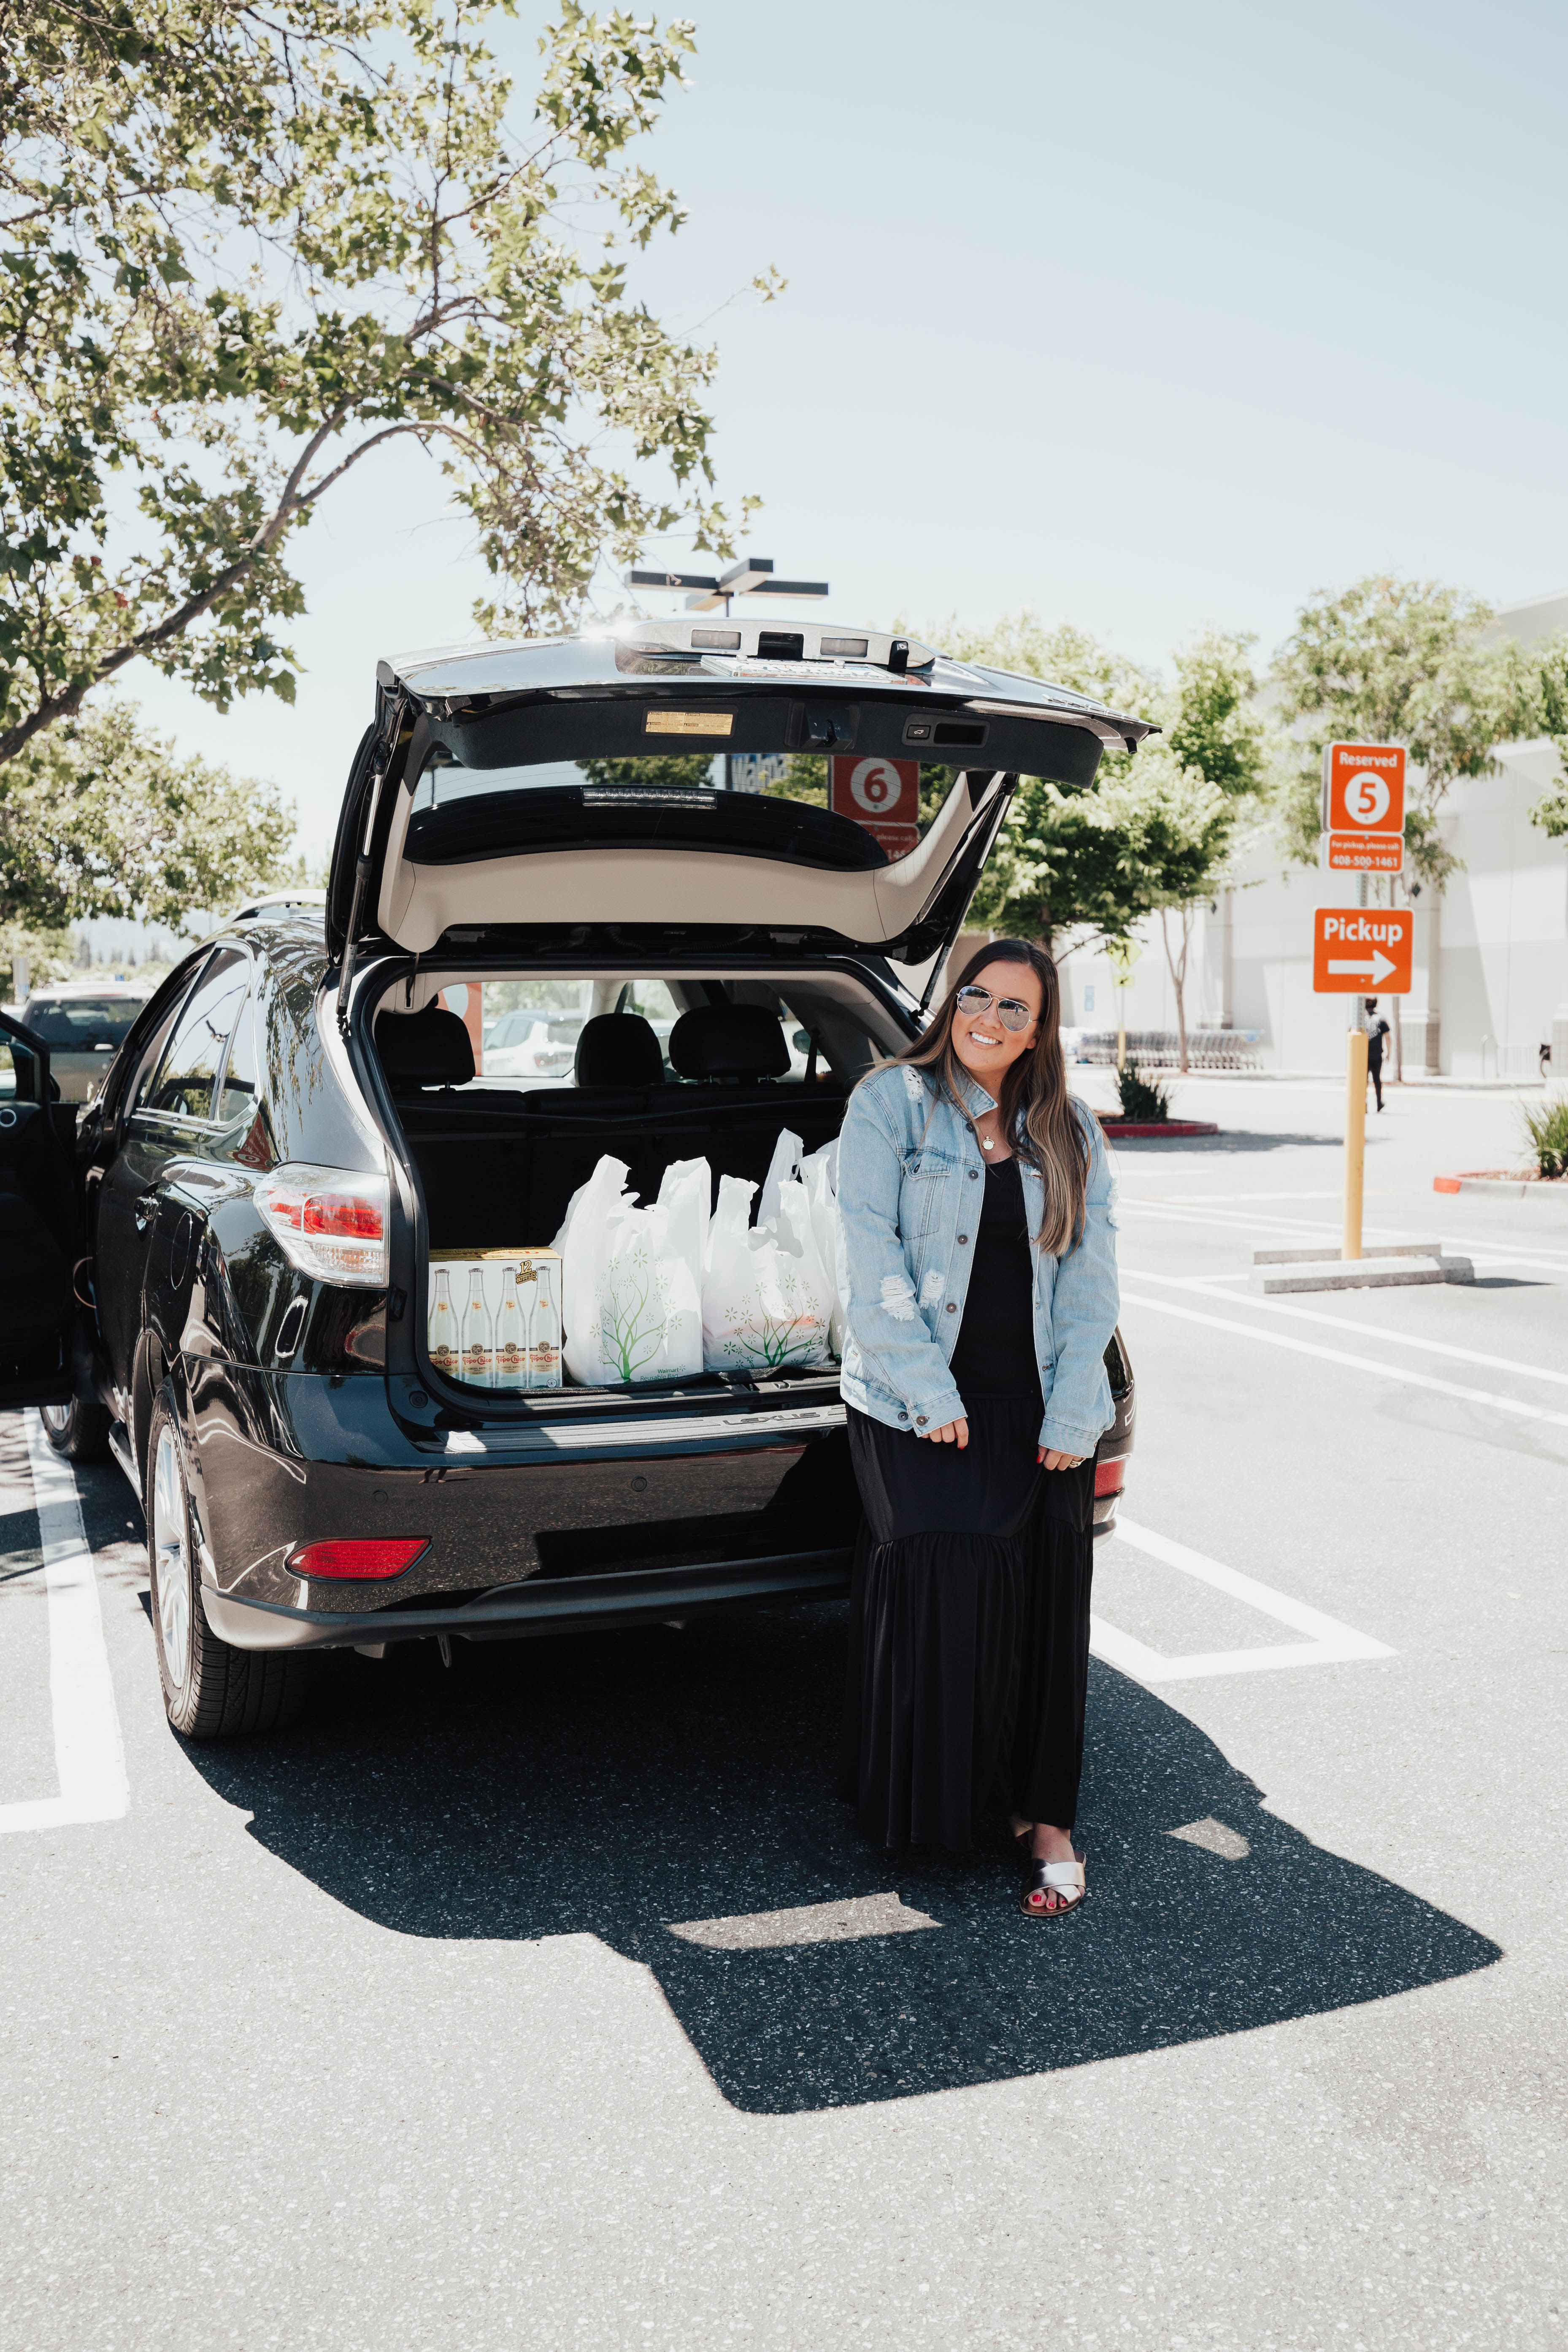 San Francisco blogger, Ashley Zeal, from Two Peas in a Prada shares her experience with Walmart Grocery Pickup. She is breaking down all the steps and how to place your first order.